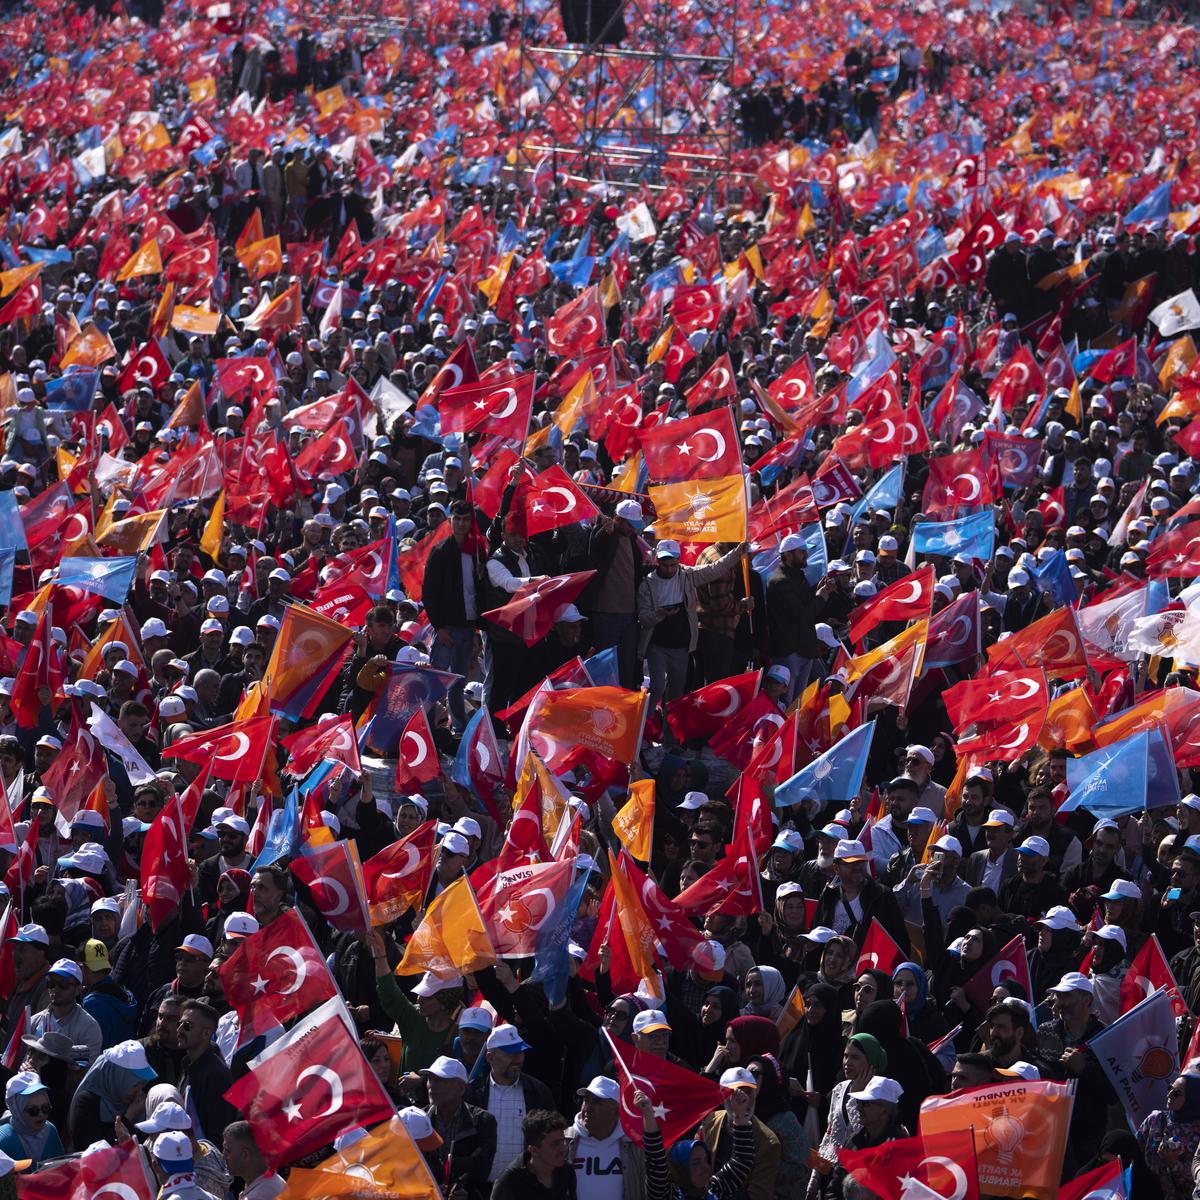 Turkey voters weigh the final decision on next President